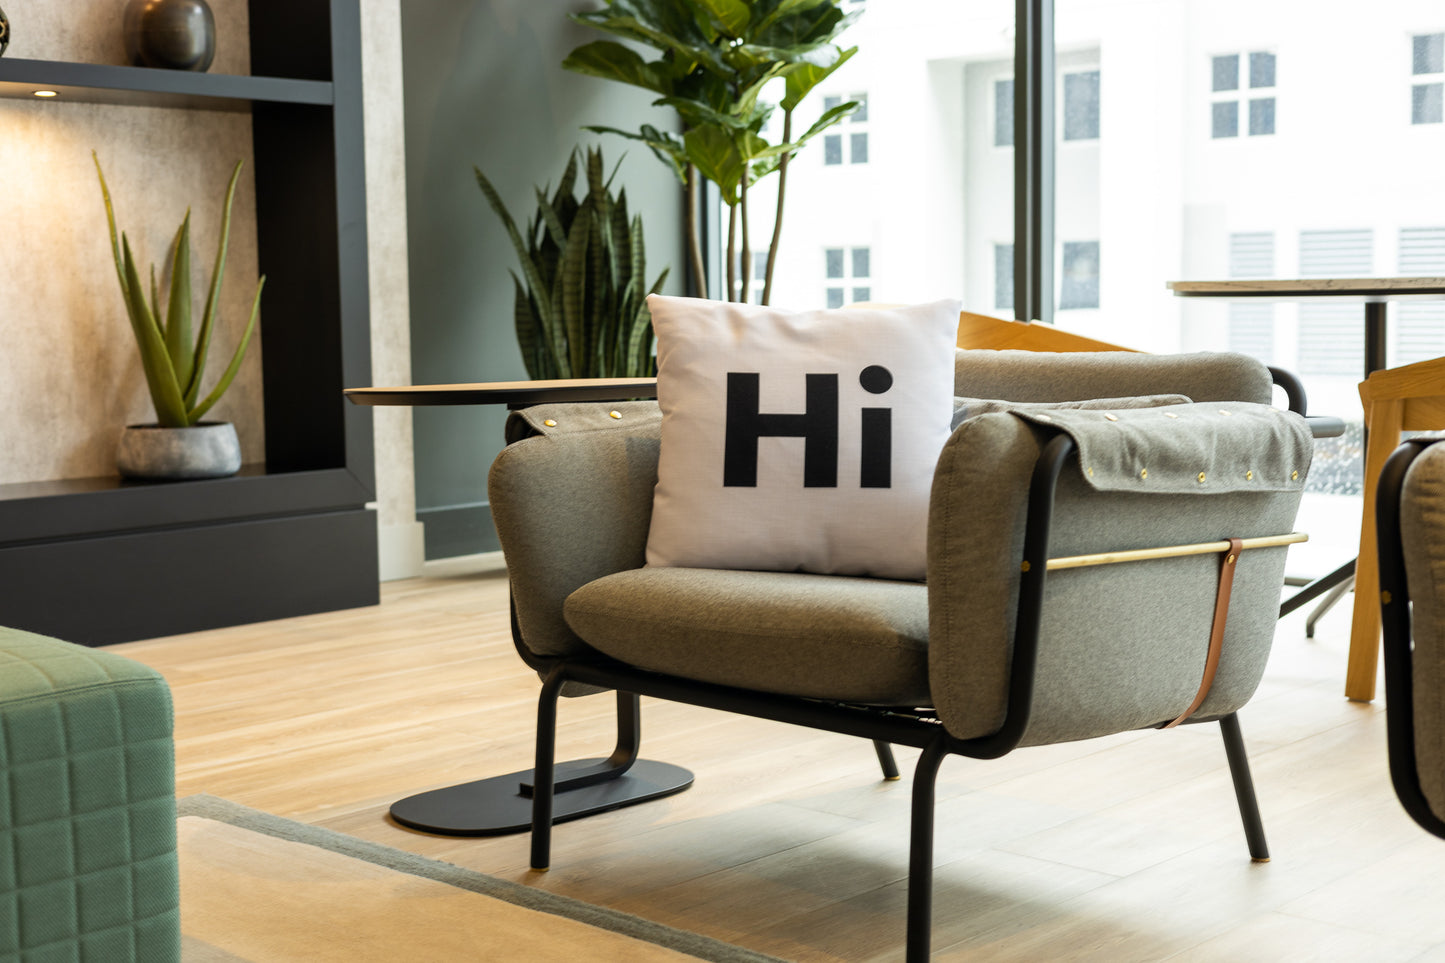 Hi Pillow by Hi Johnny in white in a building lounge space